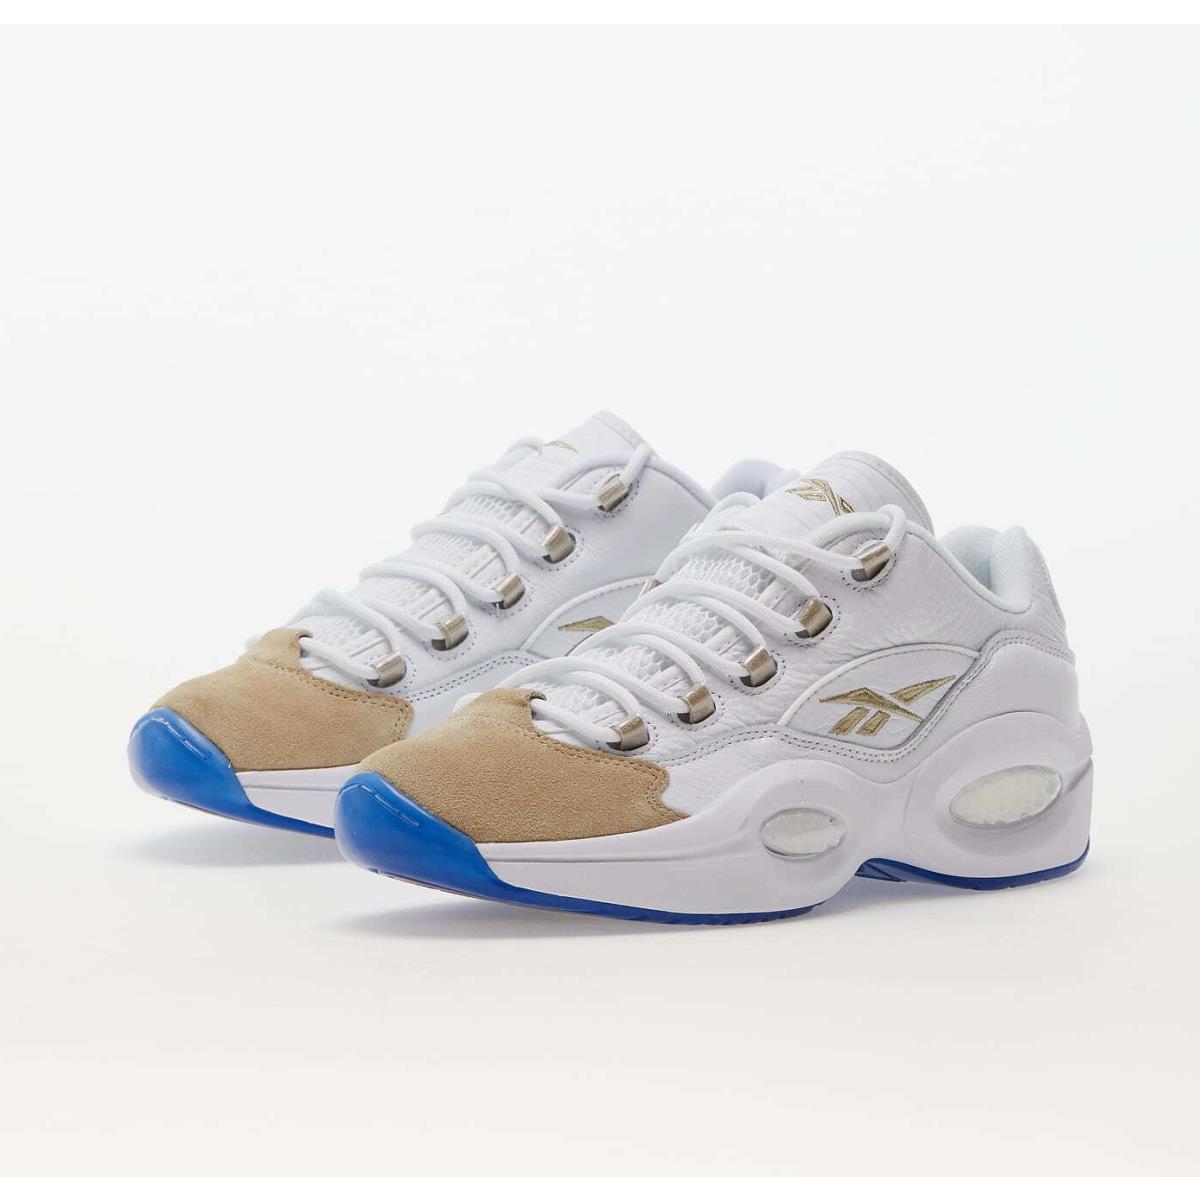 Reebok Question Low Retro Oatmeal White EF7609 Basketball Shoes Sneakers